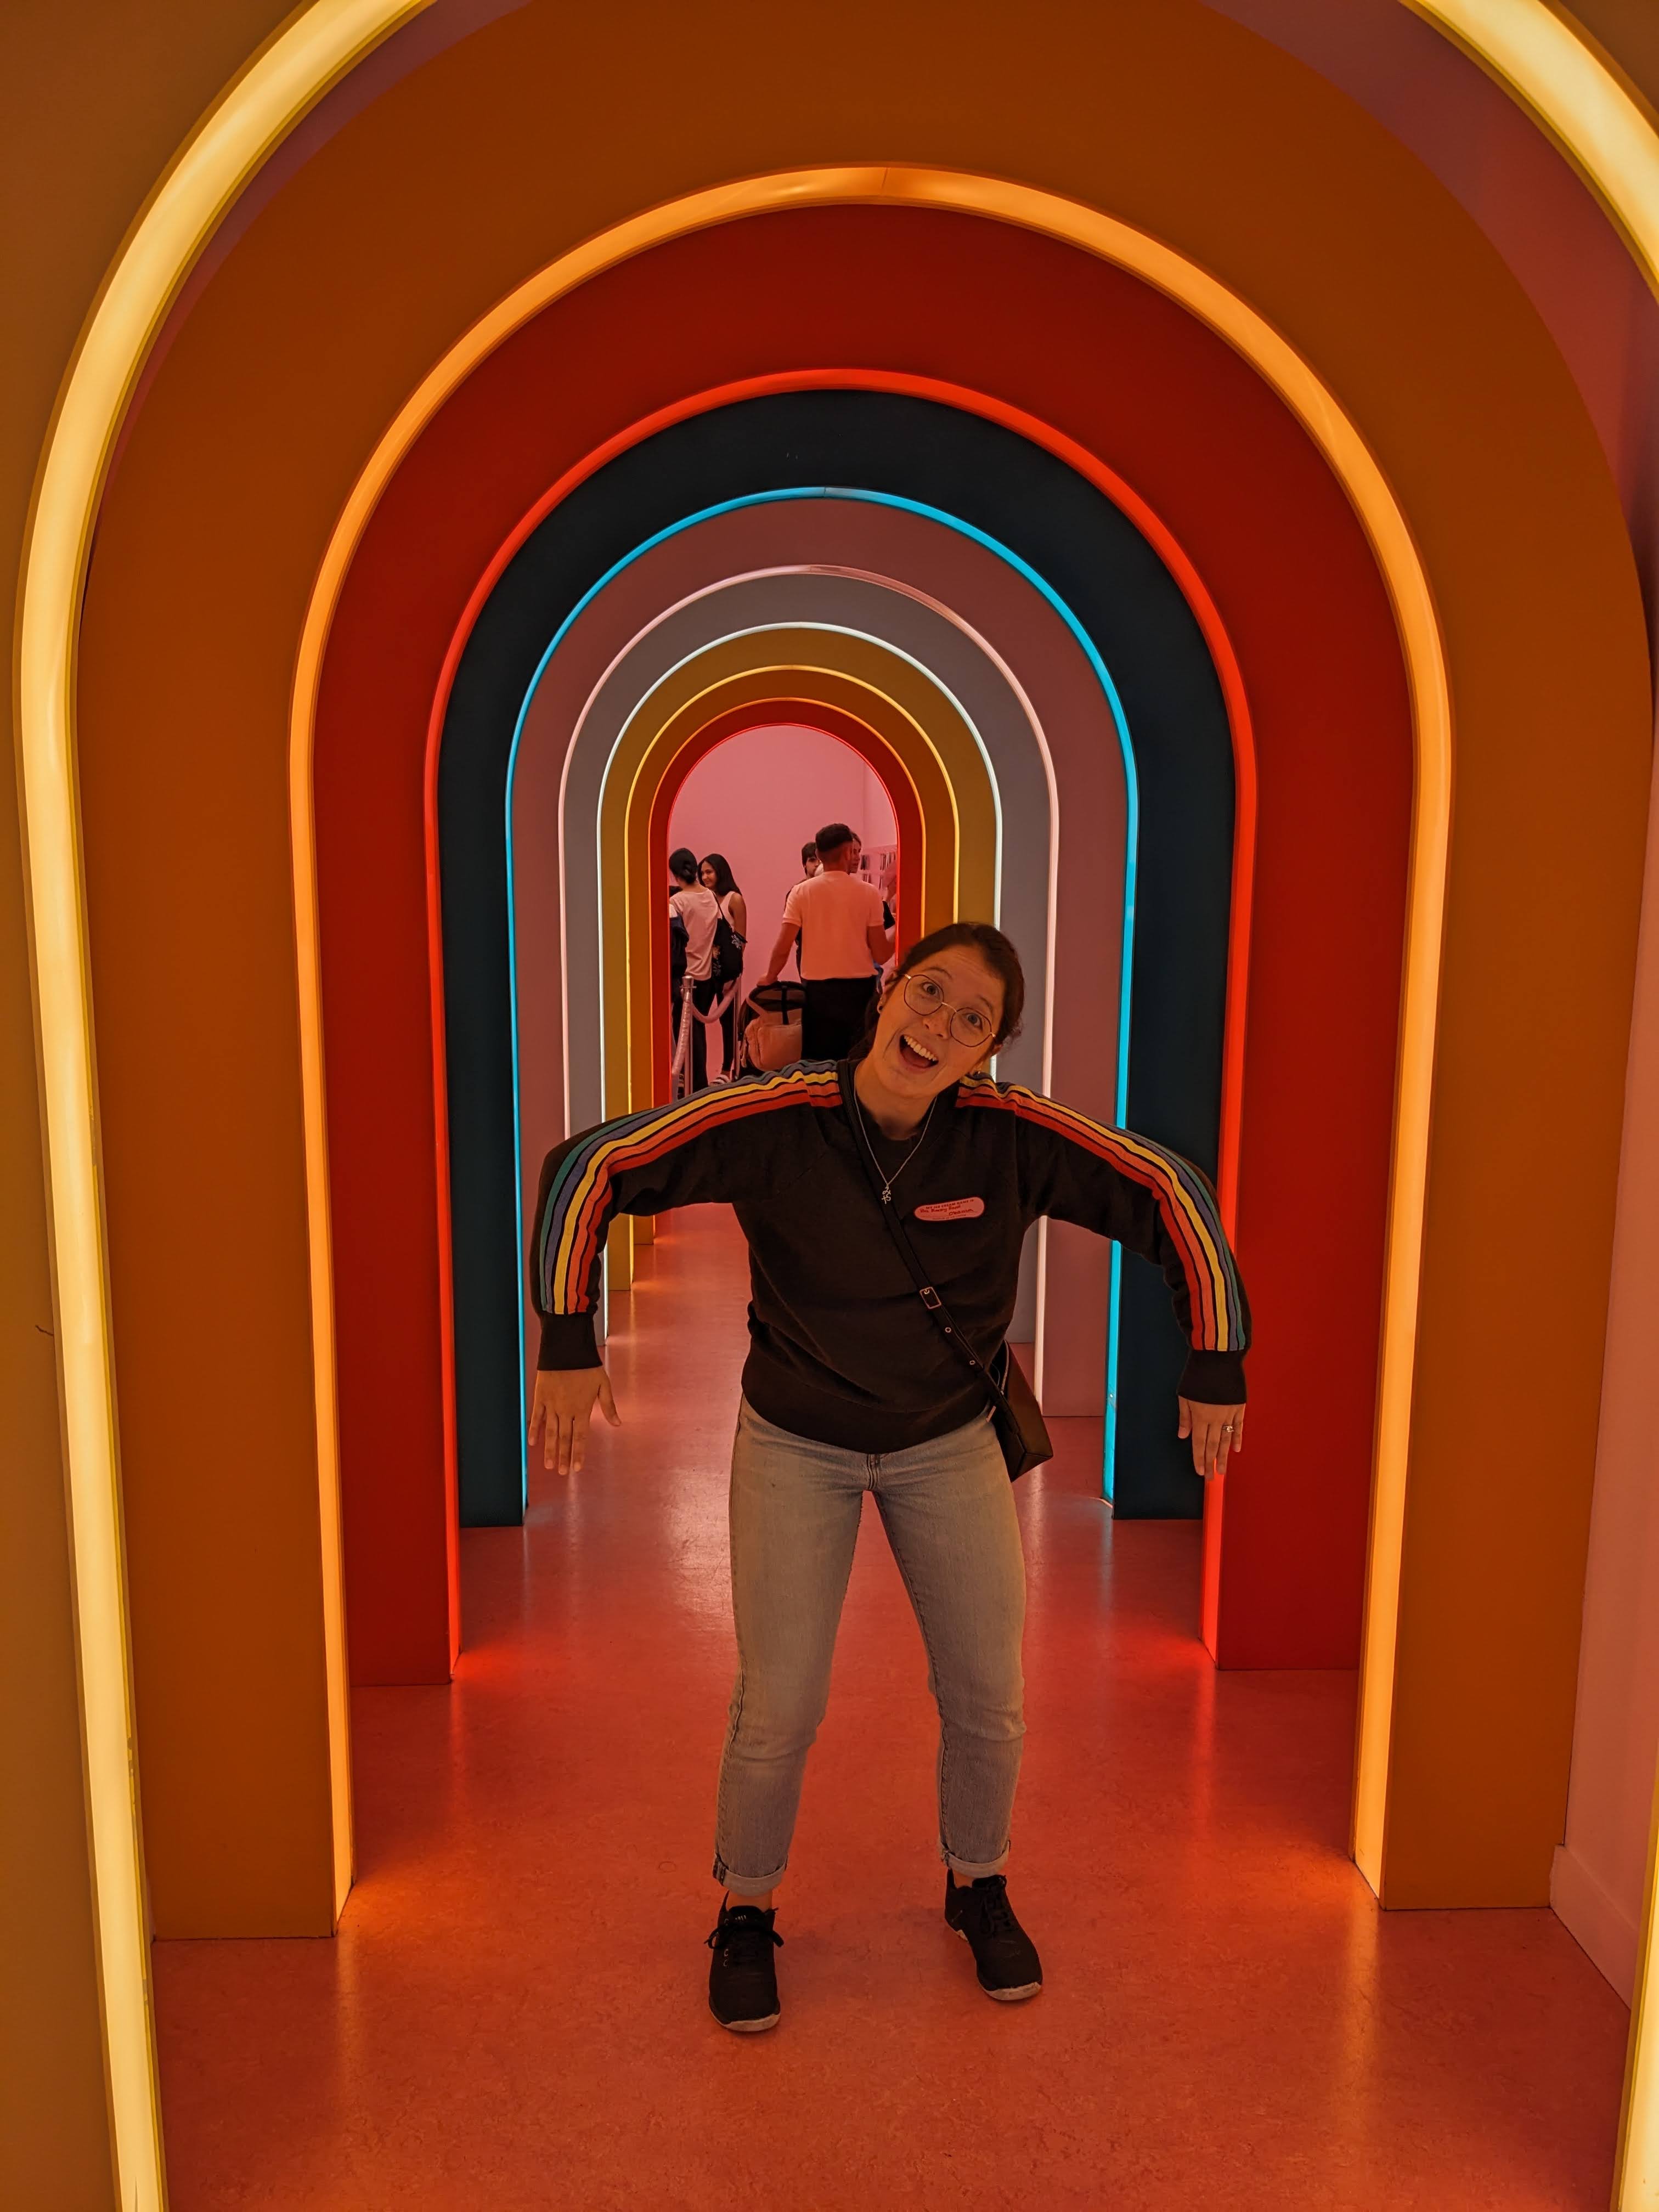 half-asian female standing in a tunnel of neon lights wearing a sweatshirt with rainbow lines down the sleeves with arms making a rainbow shape